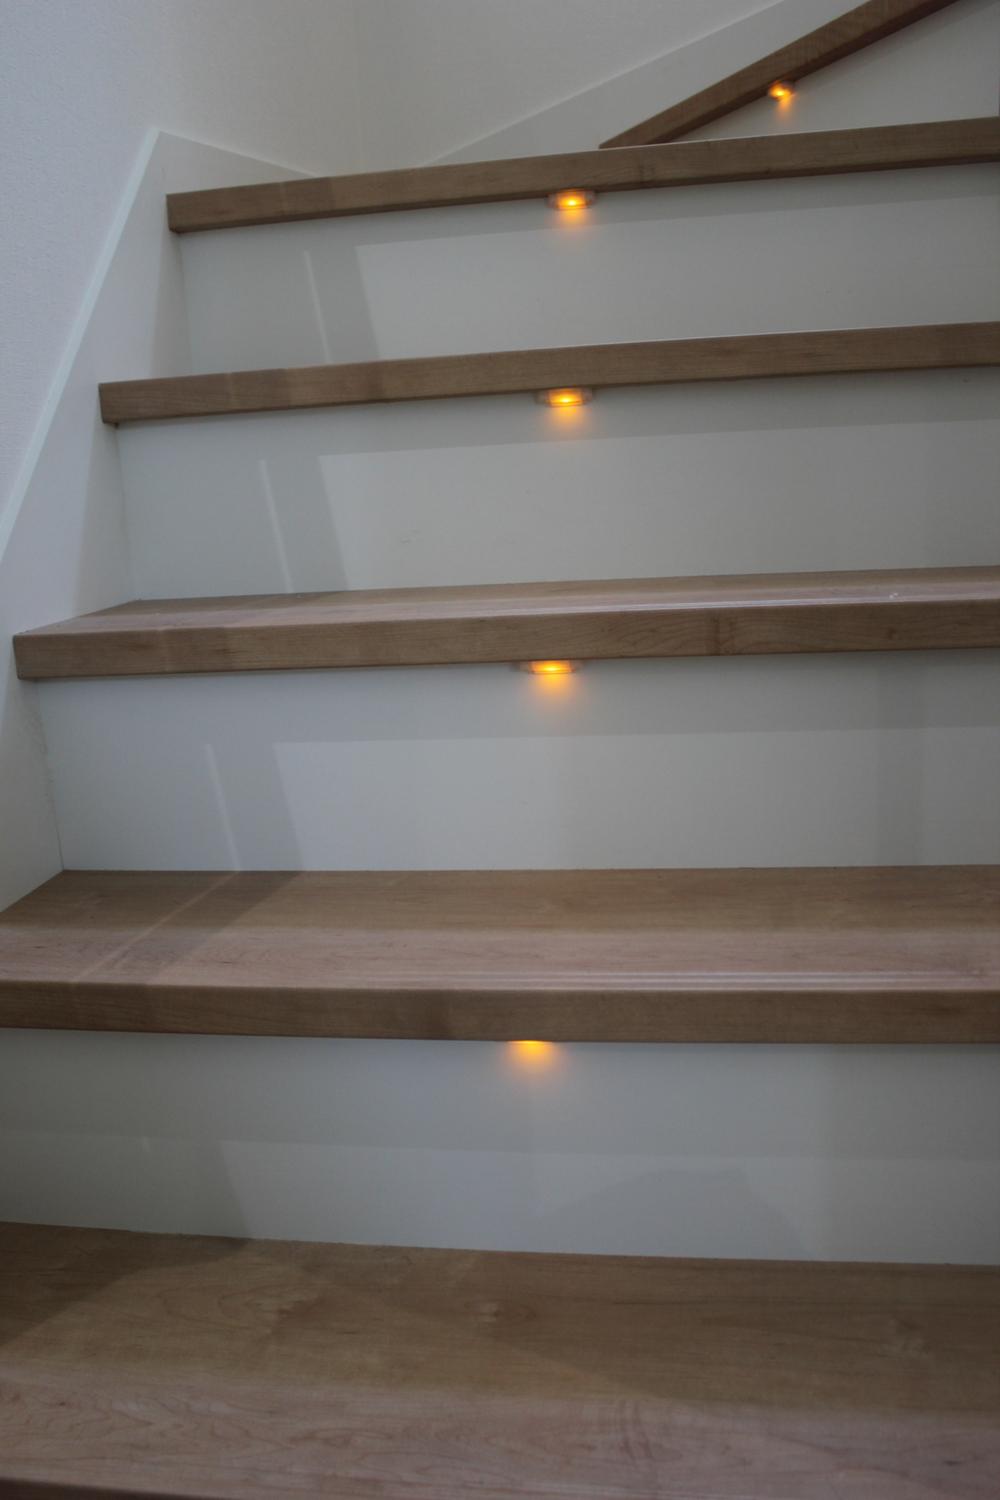 Other introspection. Lighting of the bright and warm colors with stairs firefly light will illuminate the feet